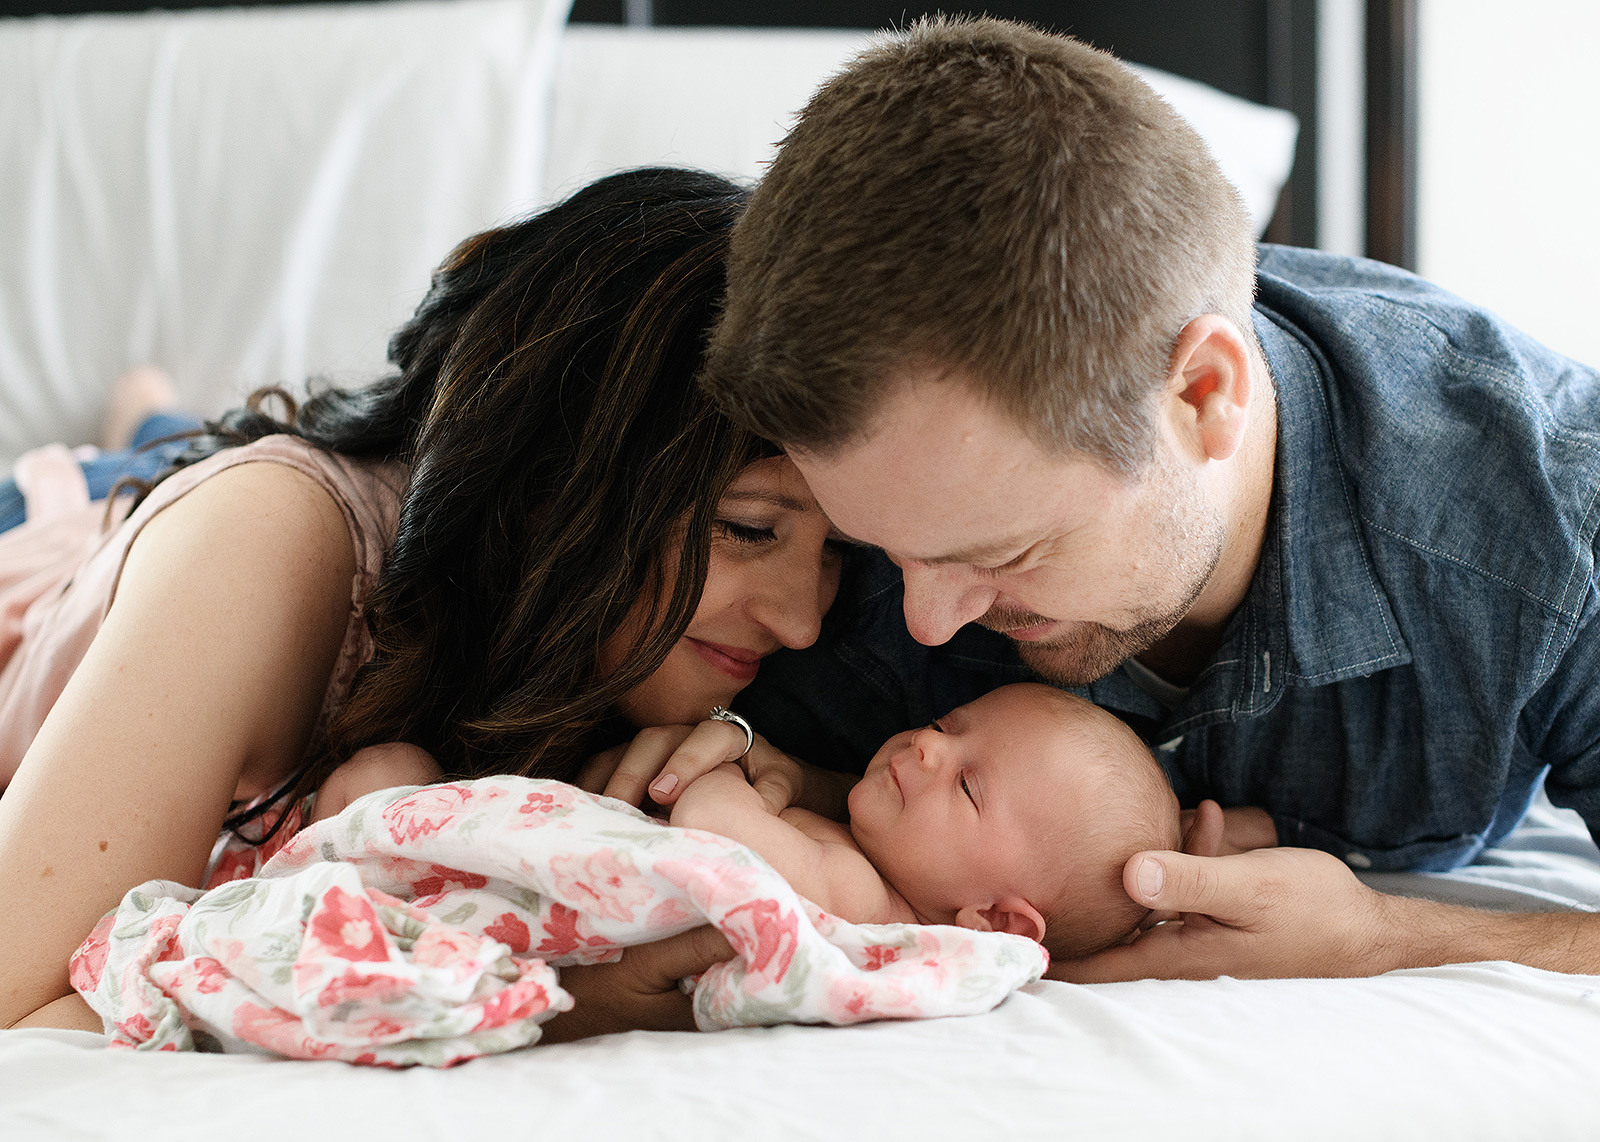 Mom and dad holding newborn baby girl on bed photo shoot in home